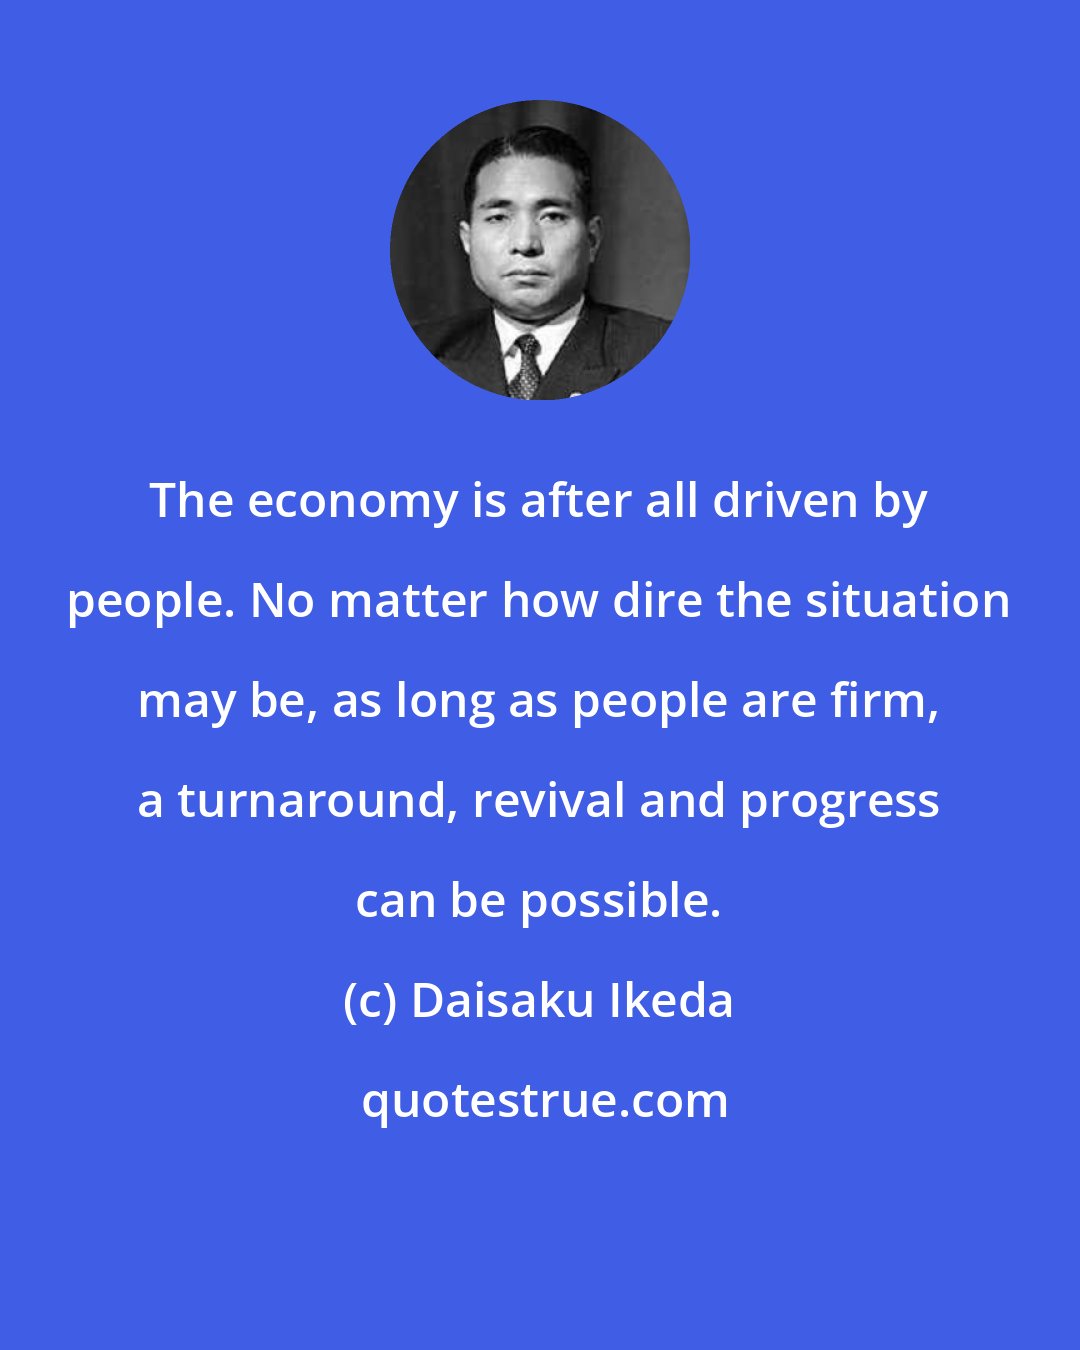 Daisaku Ikeda: The economy is after all driven by people. No matter how dire the situation may be, as long as people are firm, a turnaround, revival and progress can be possible.